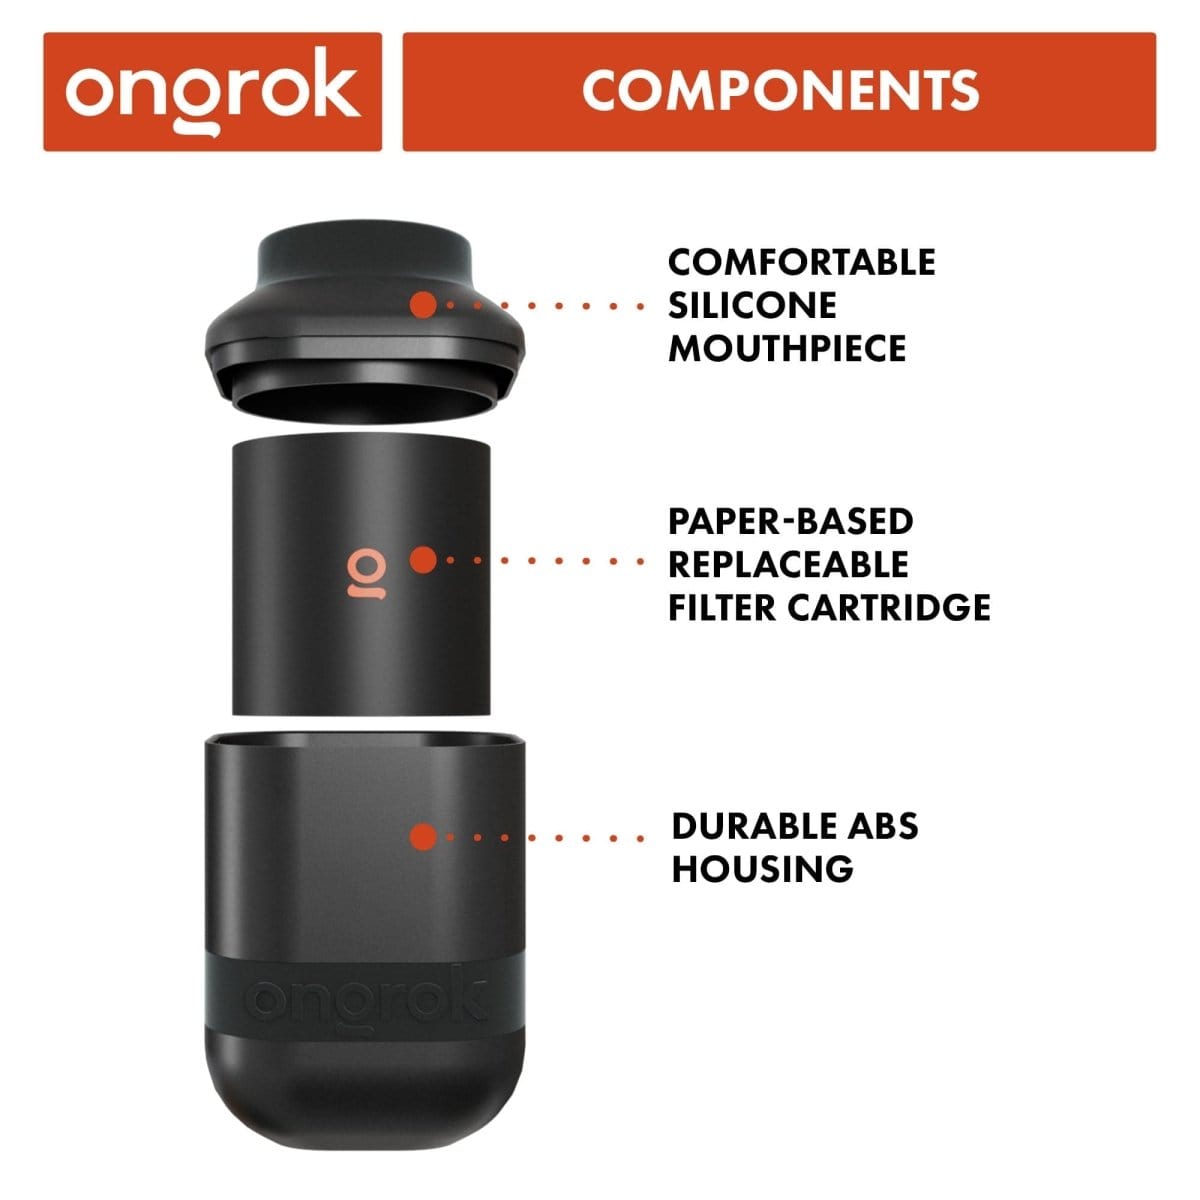 ONGROK USA Personal Air Filter with Replaceable Cartridges